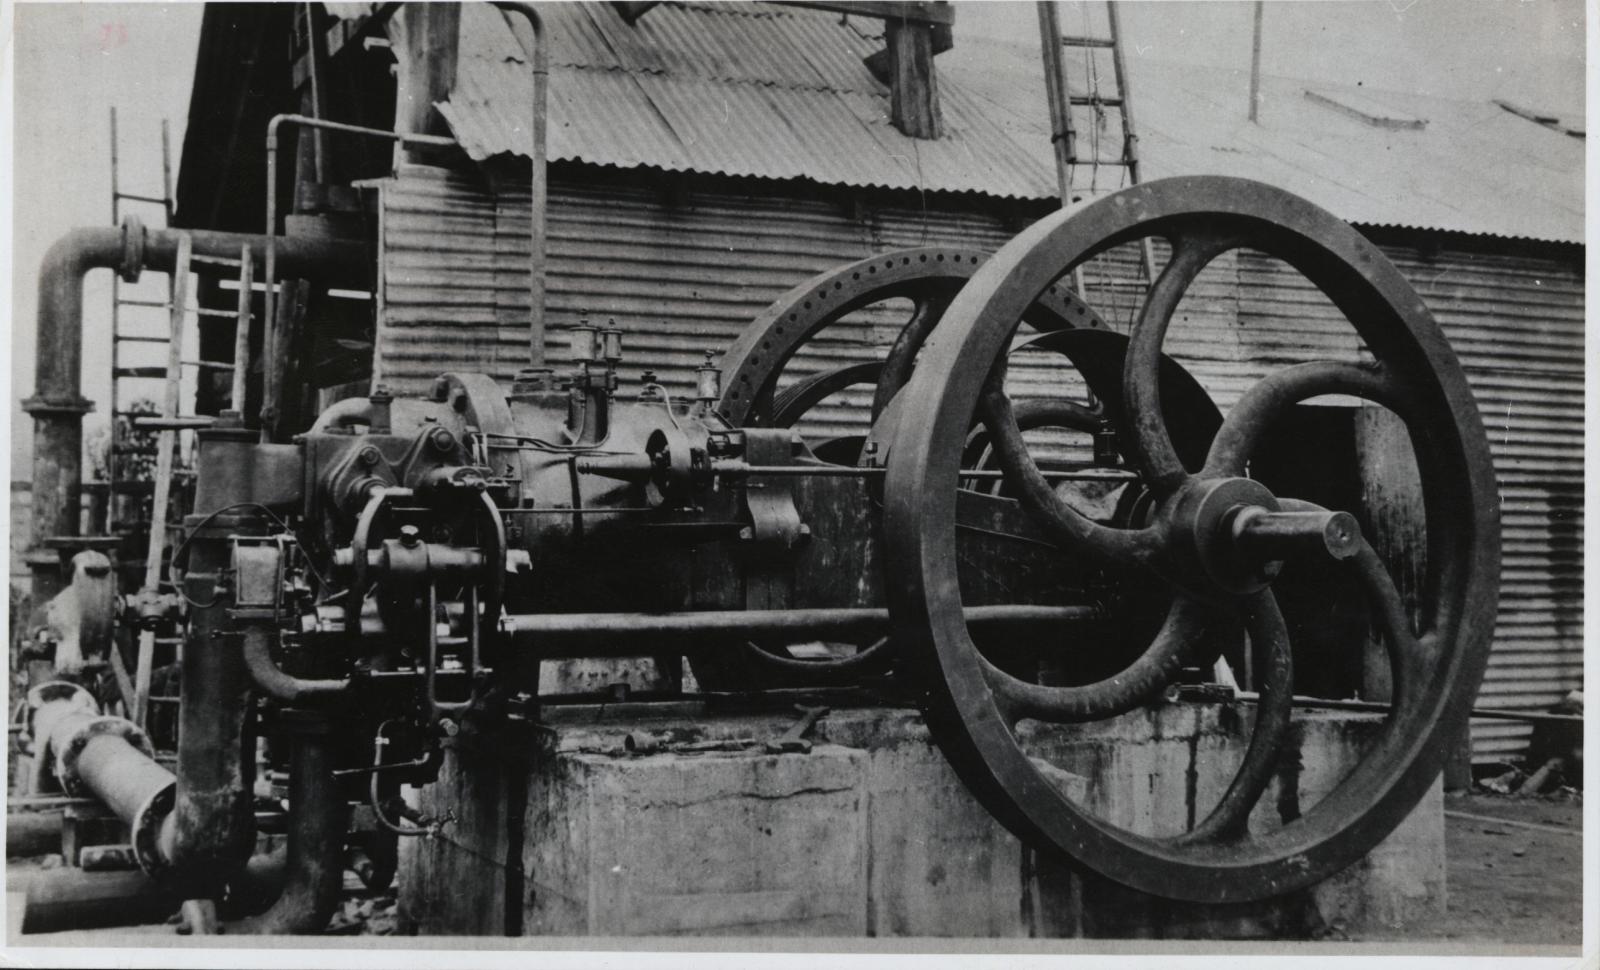 Believed to be a Ruston-Hornsby gas engine